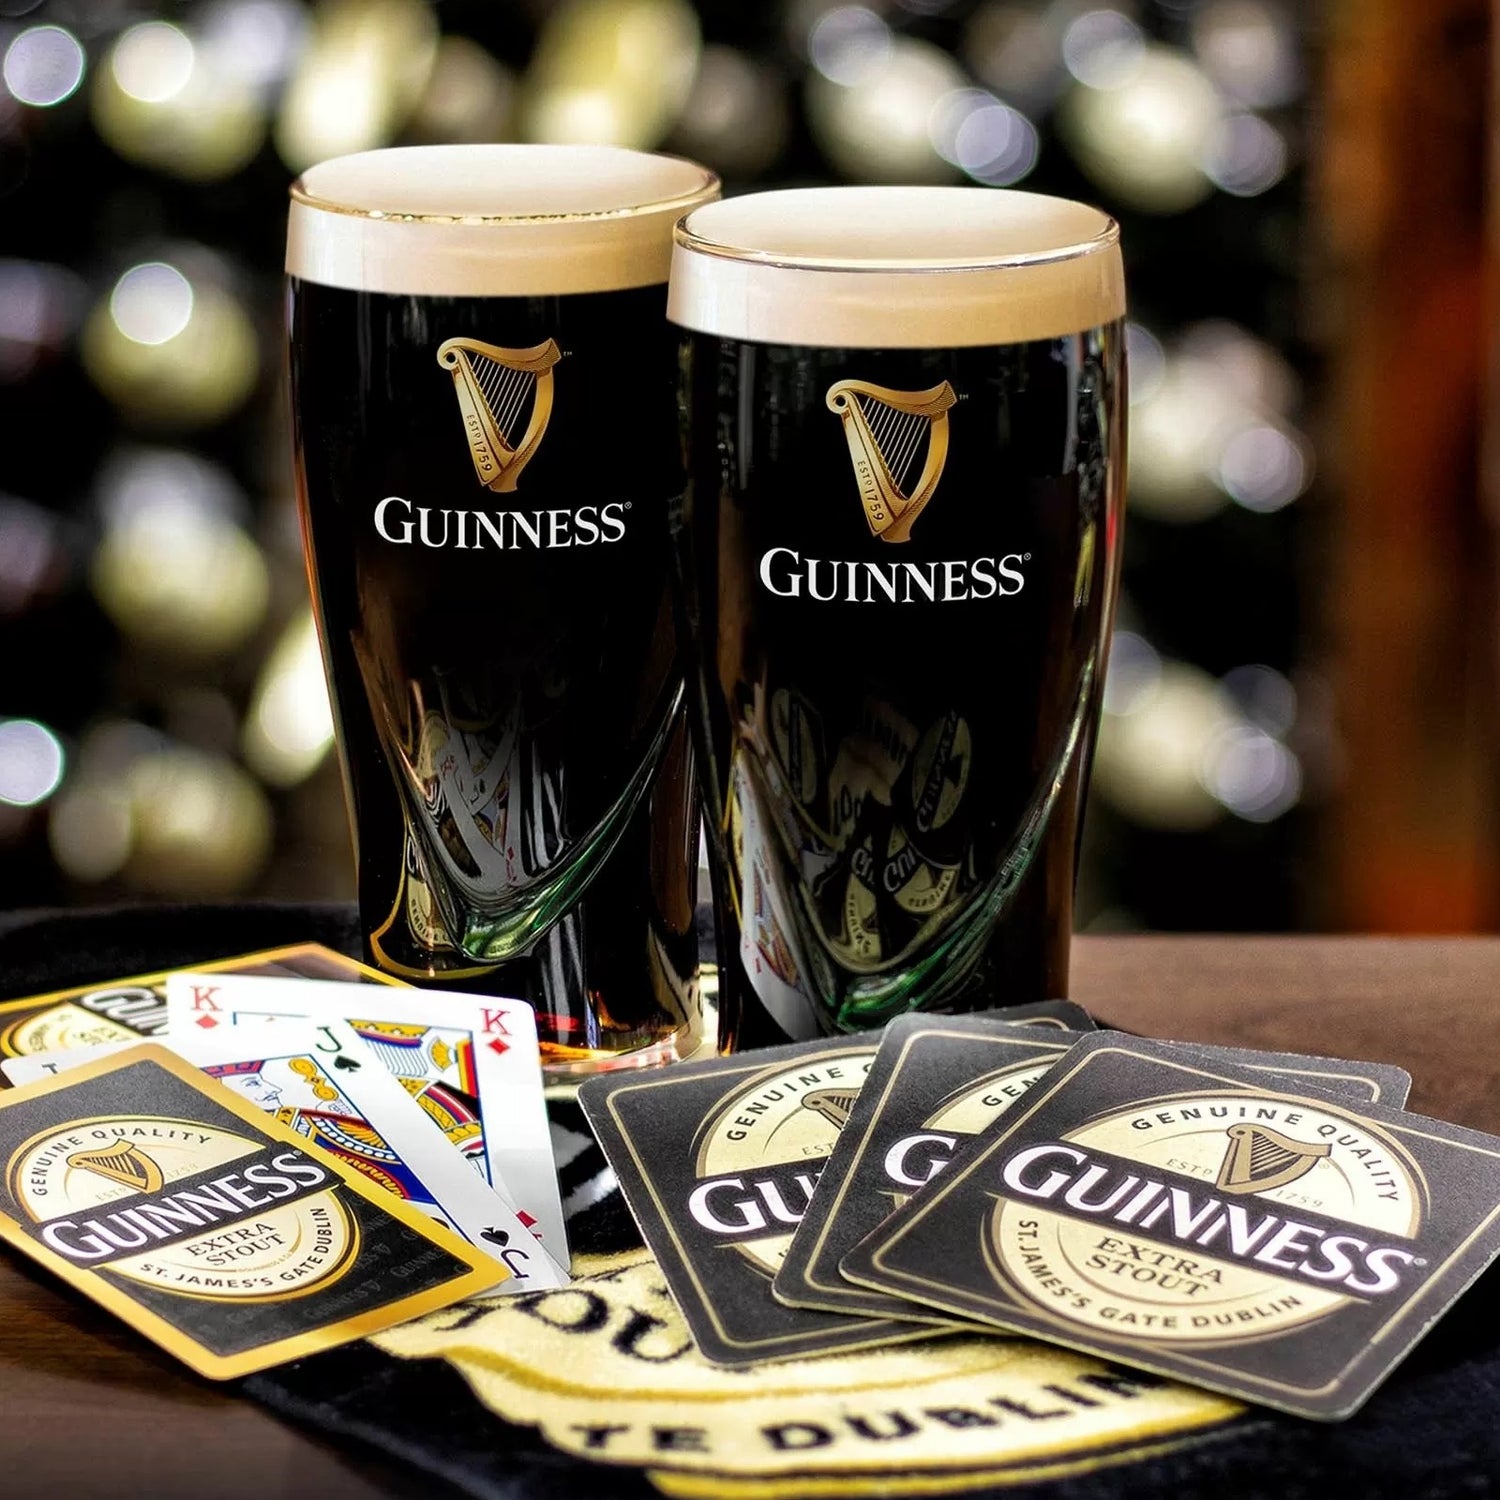 Official Guinness Pint Glasses 4 Pack, Guinness Store, Free US Shipping